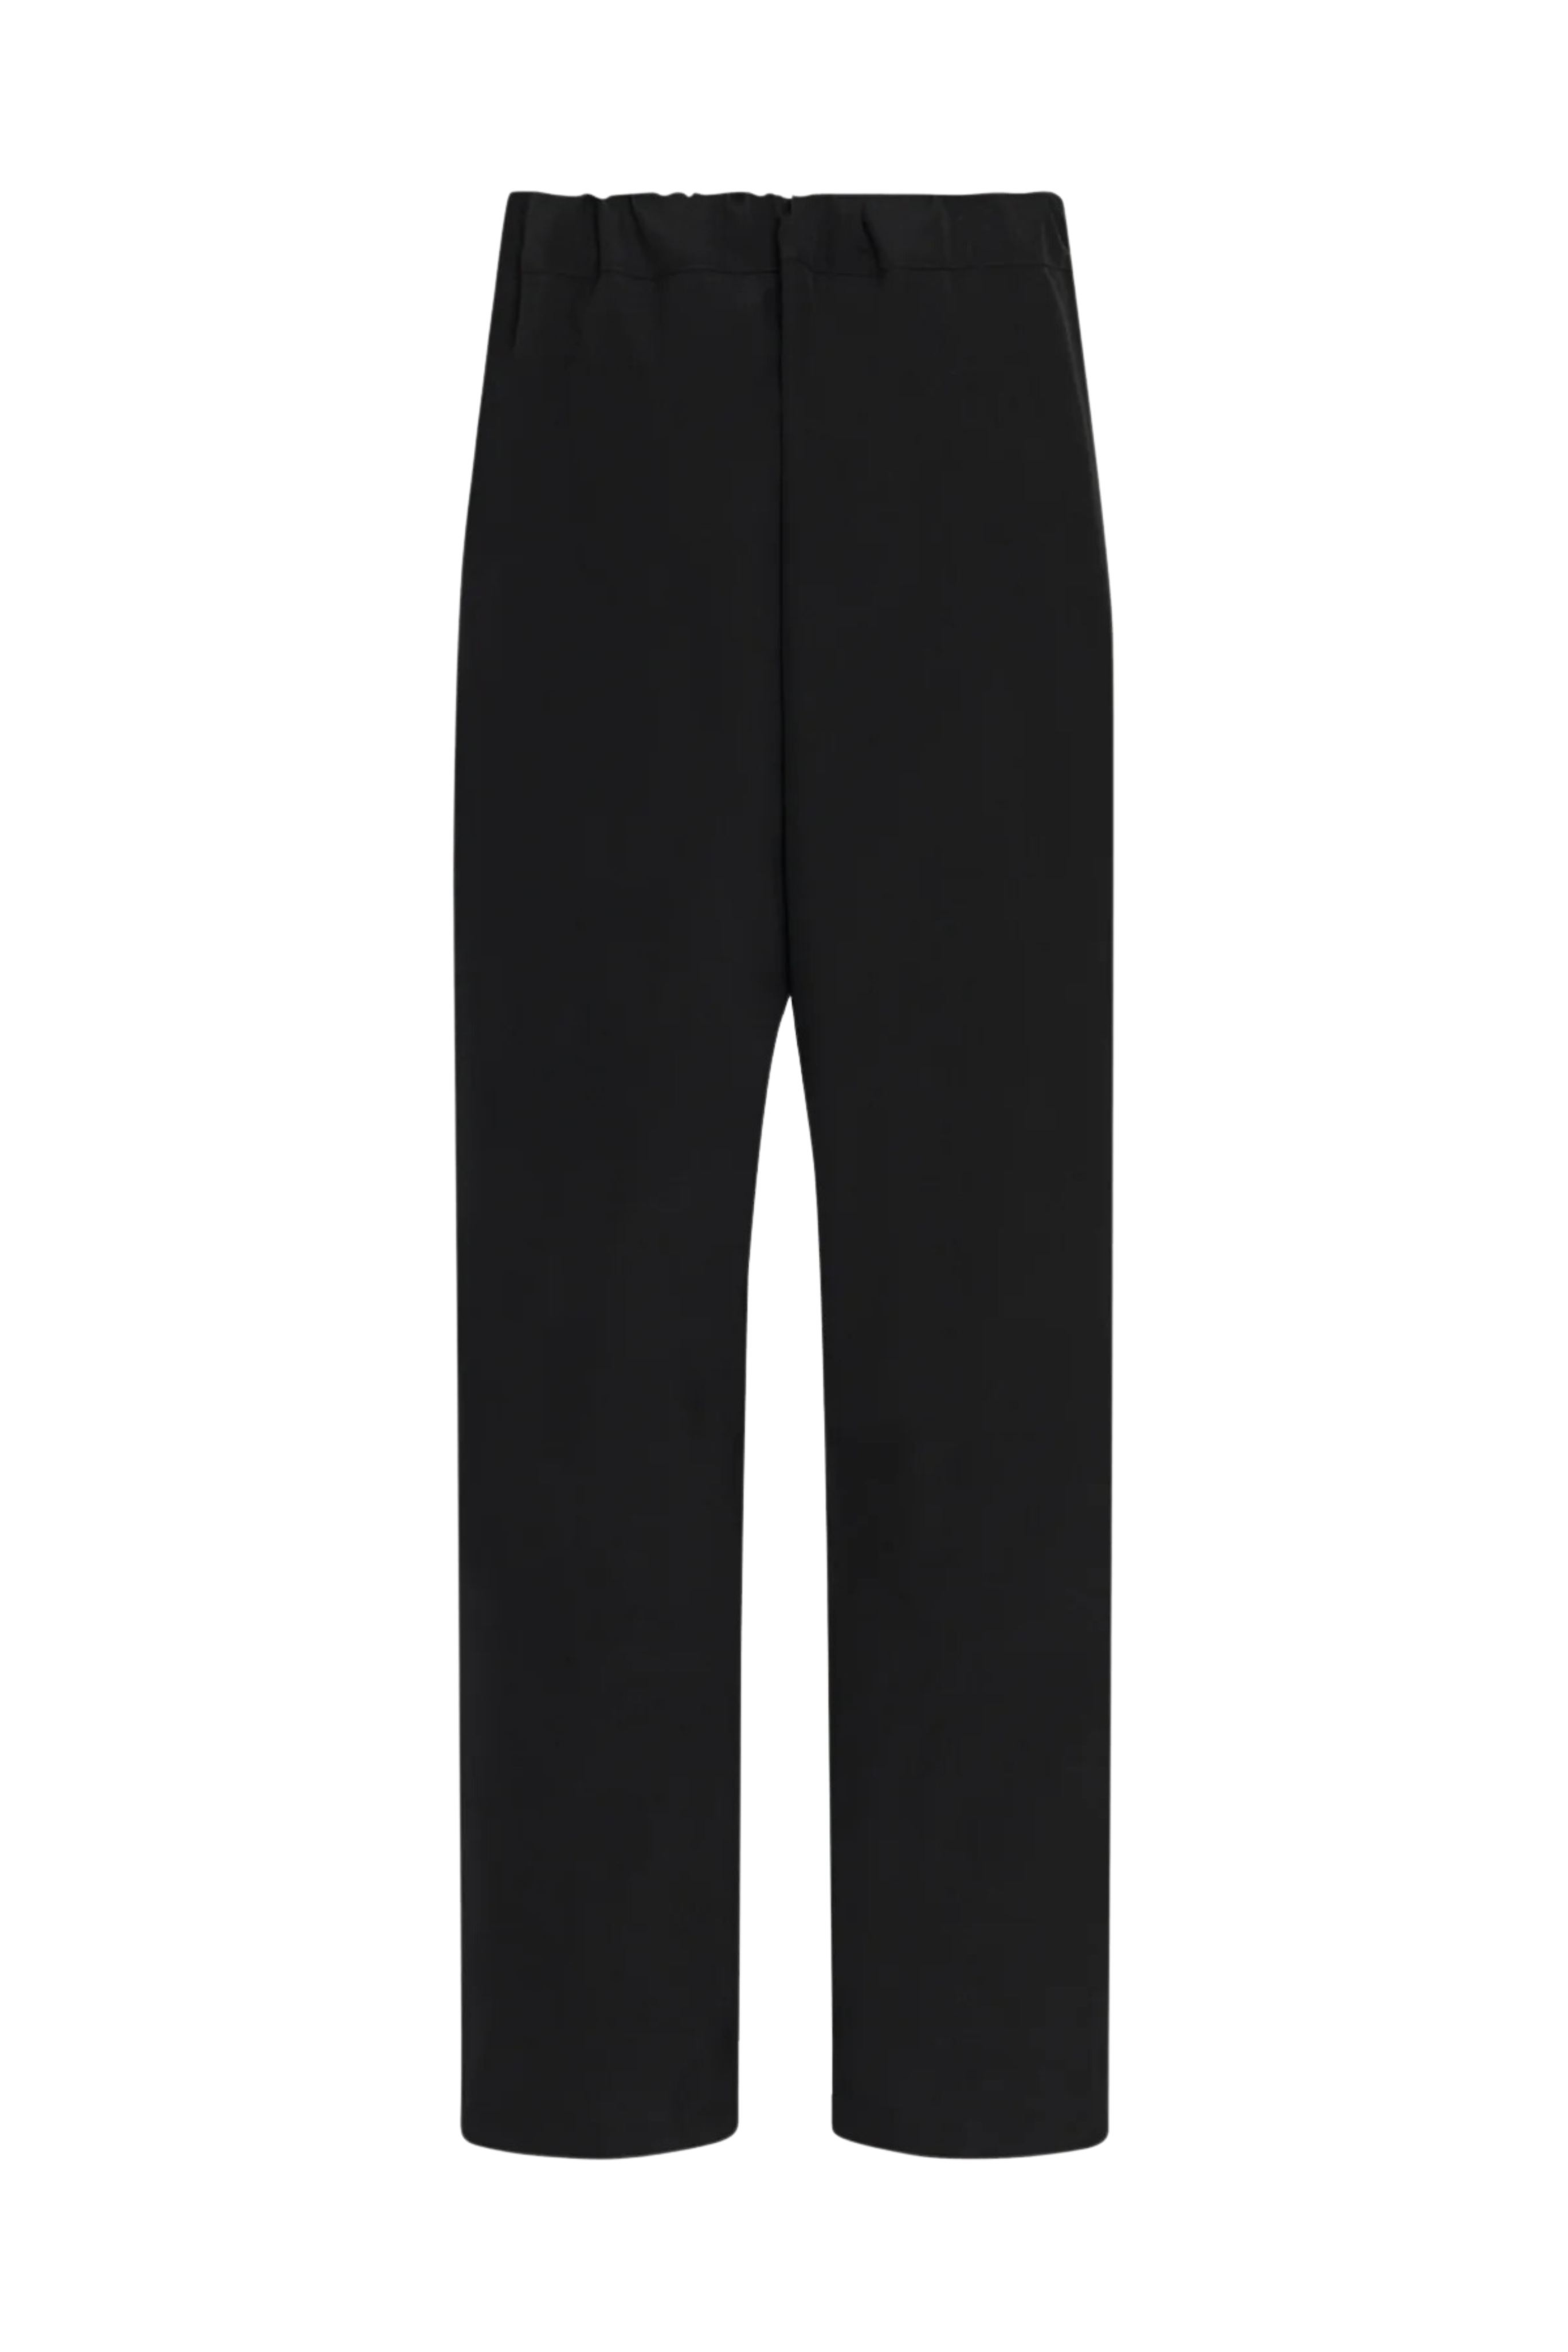 THE ROW Argent Drawstring Pants